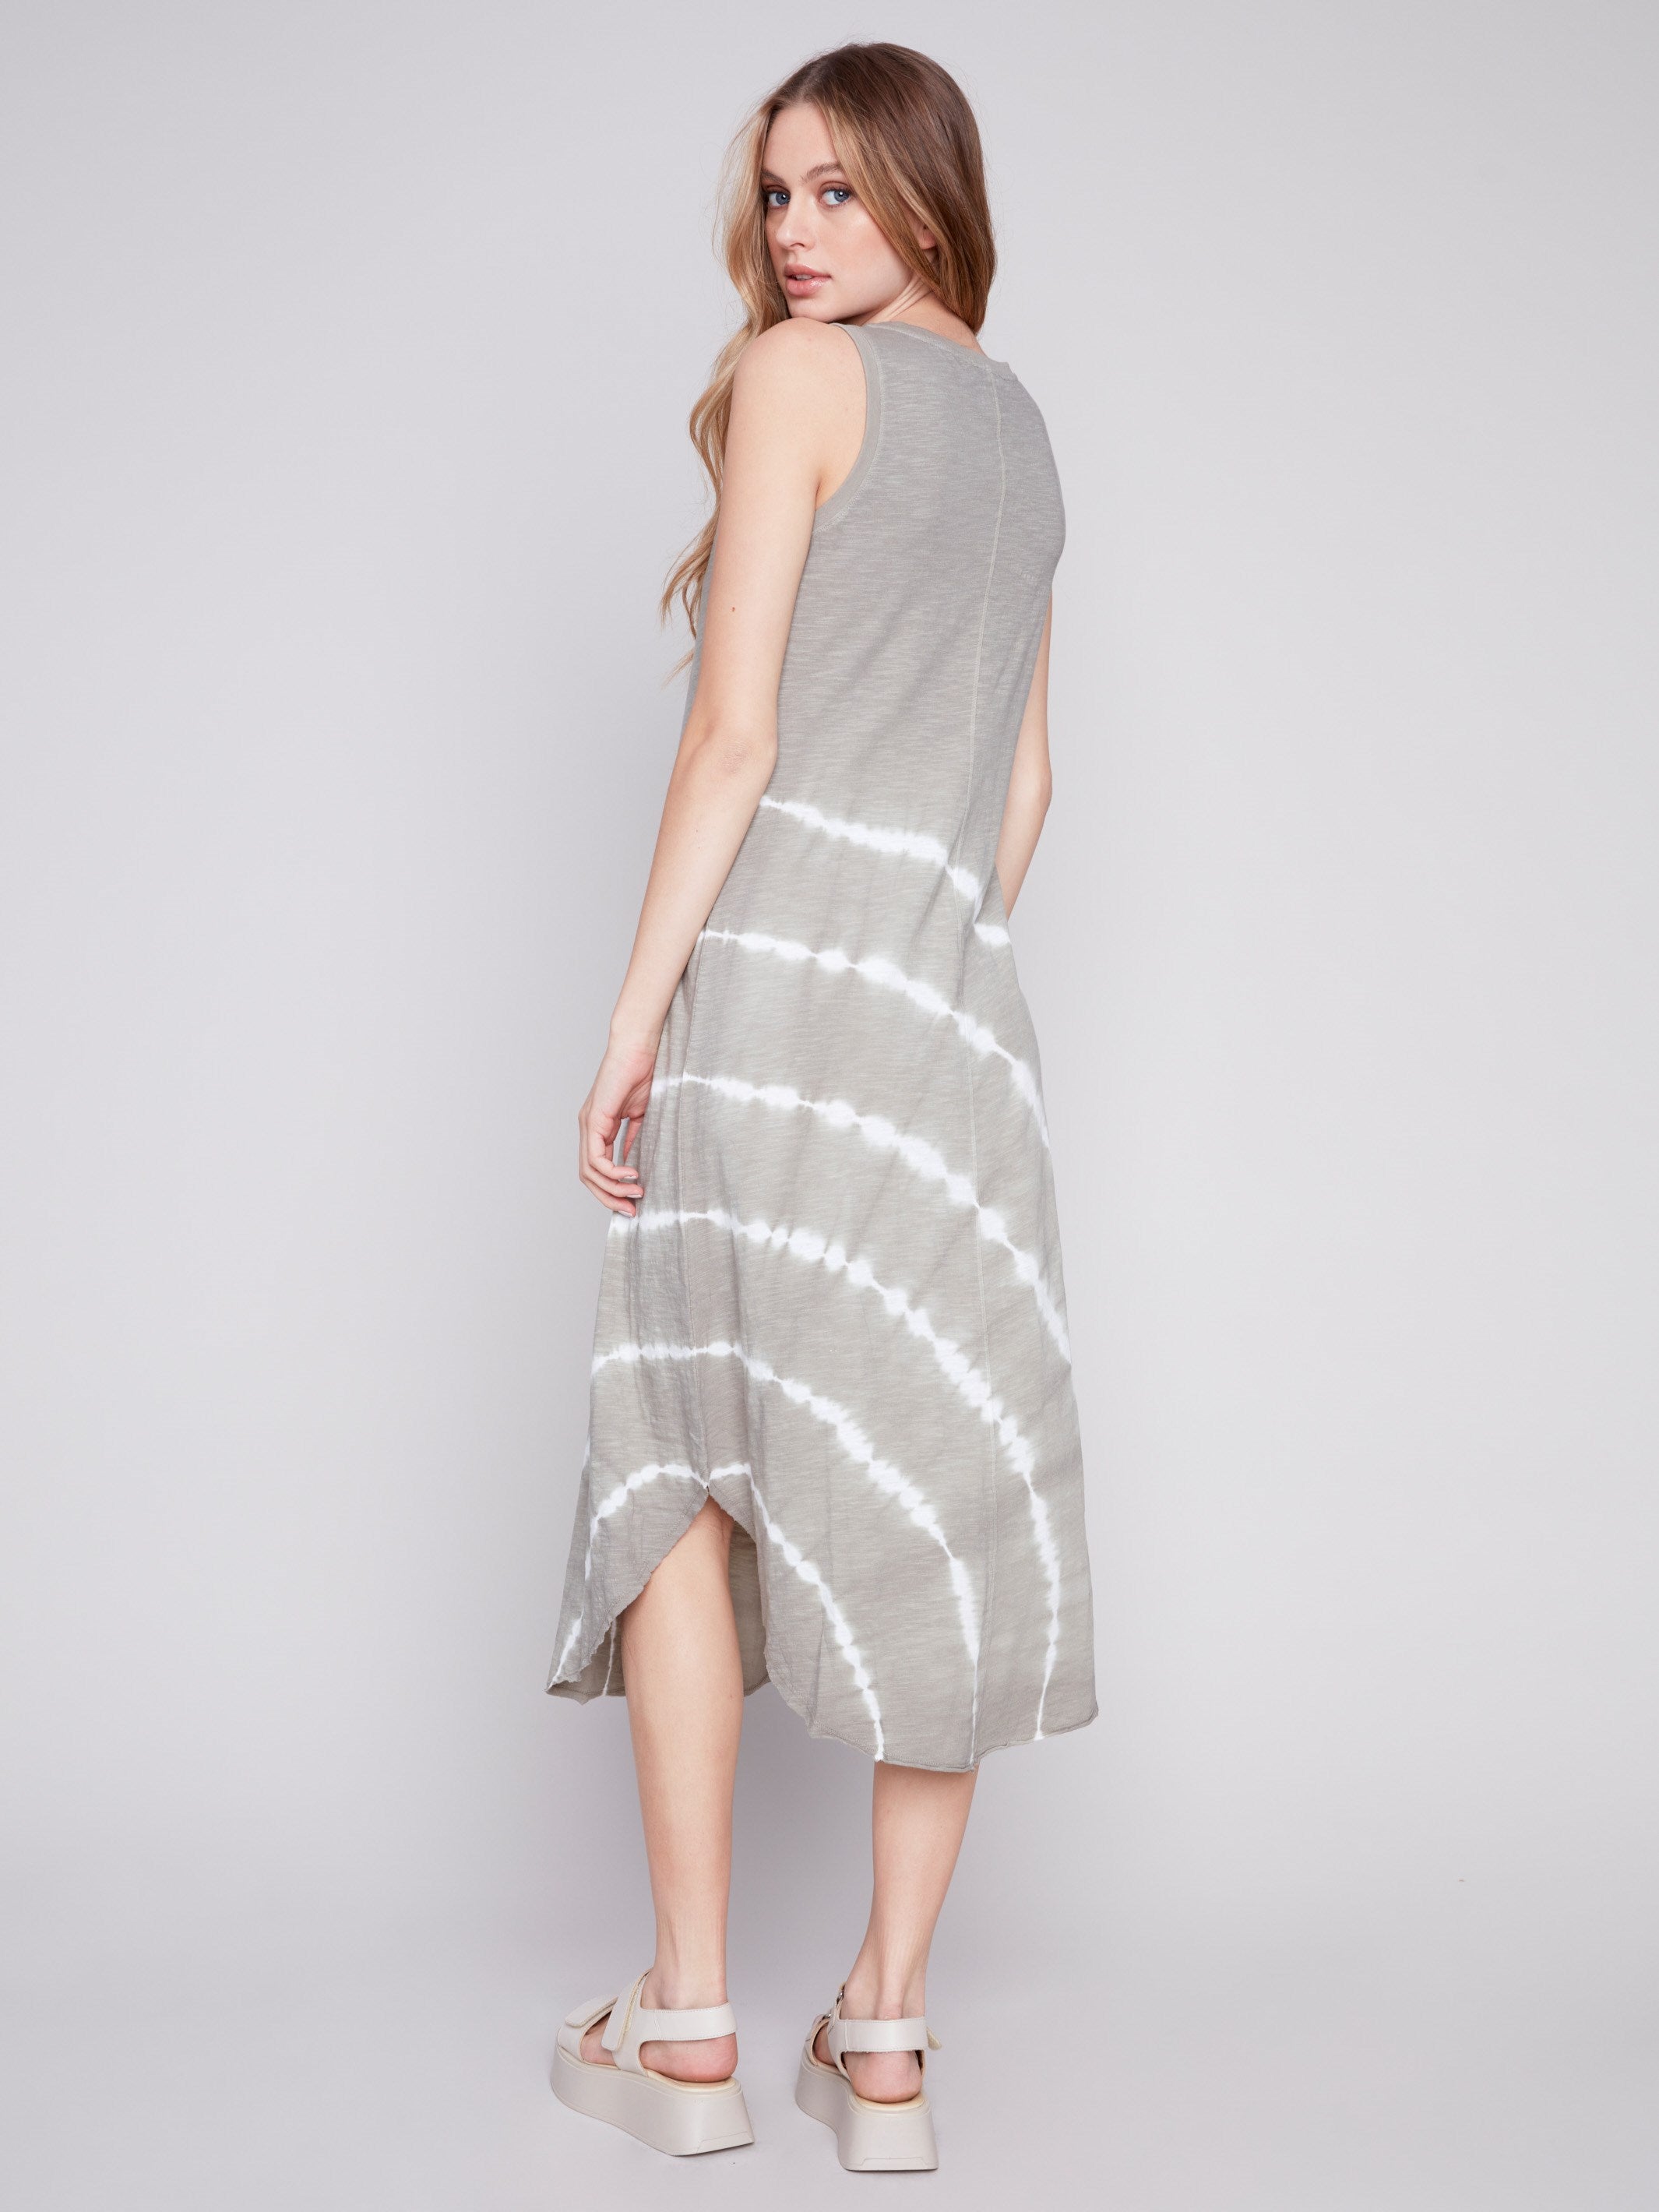 Printed Sleeveless Cotton Dress - Celadon - Charlie B Collection Canada - Image 2